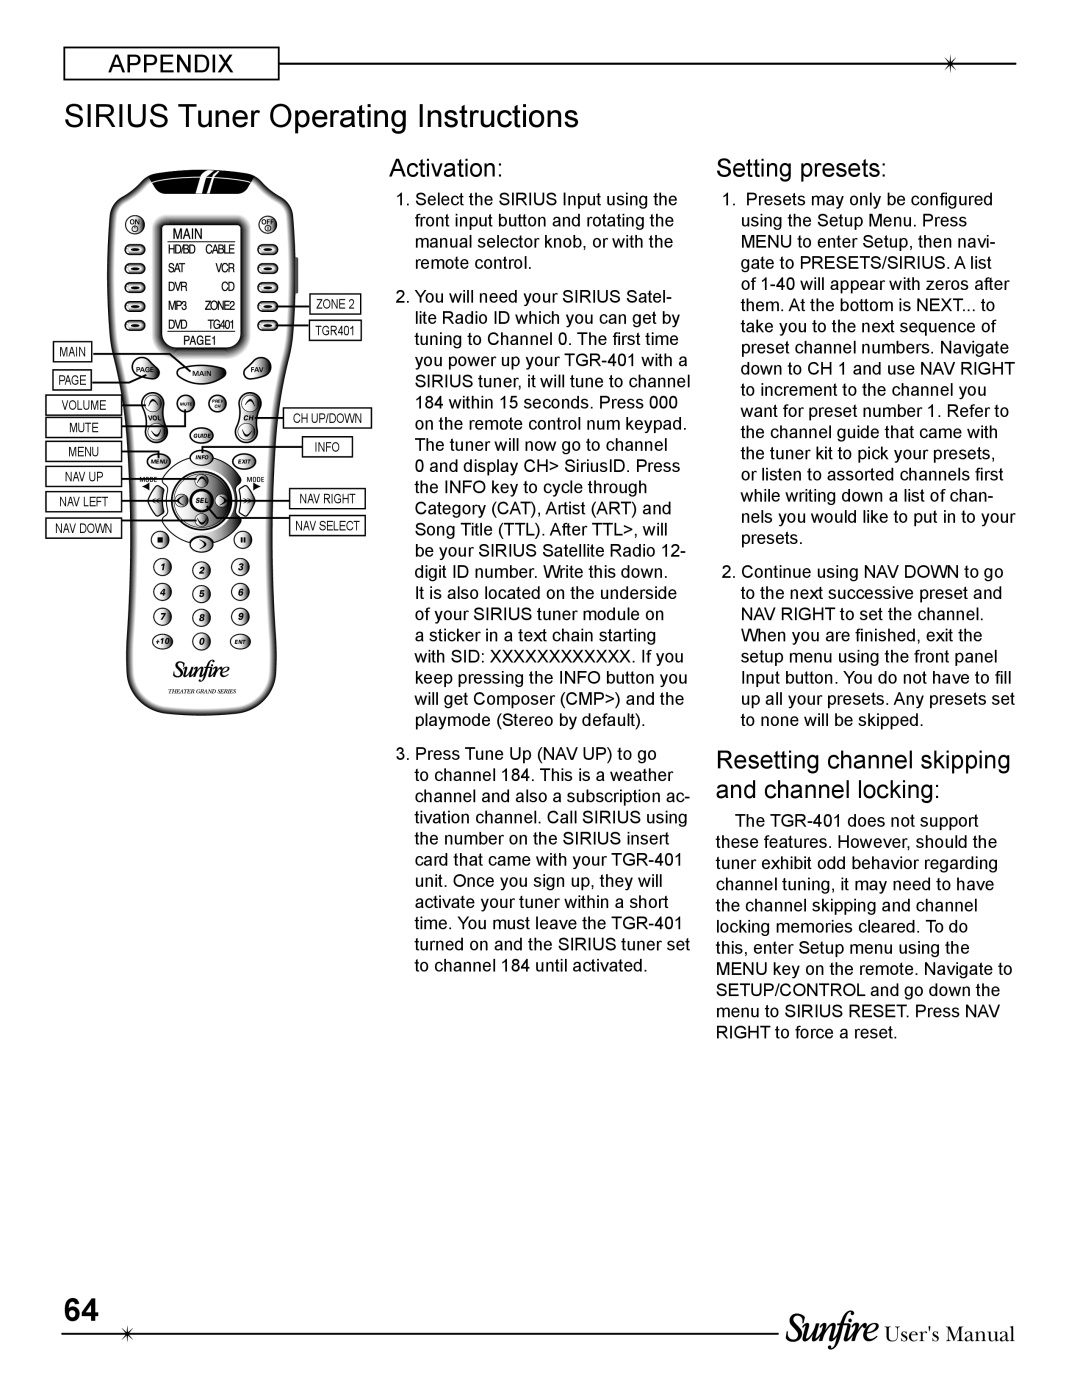 Sunfire TGR-401-230 manual SIRIUS Tuner Operating Instructions, Appendix, Activation, Setting presets, Users Manual 